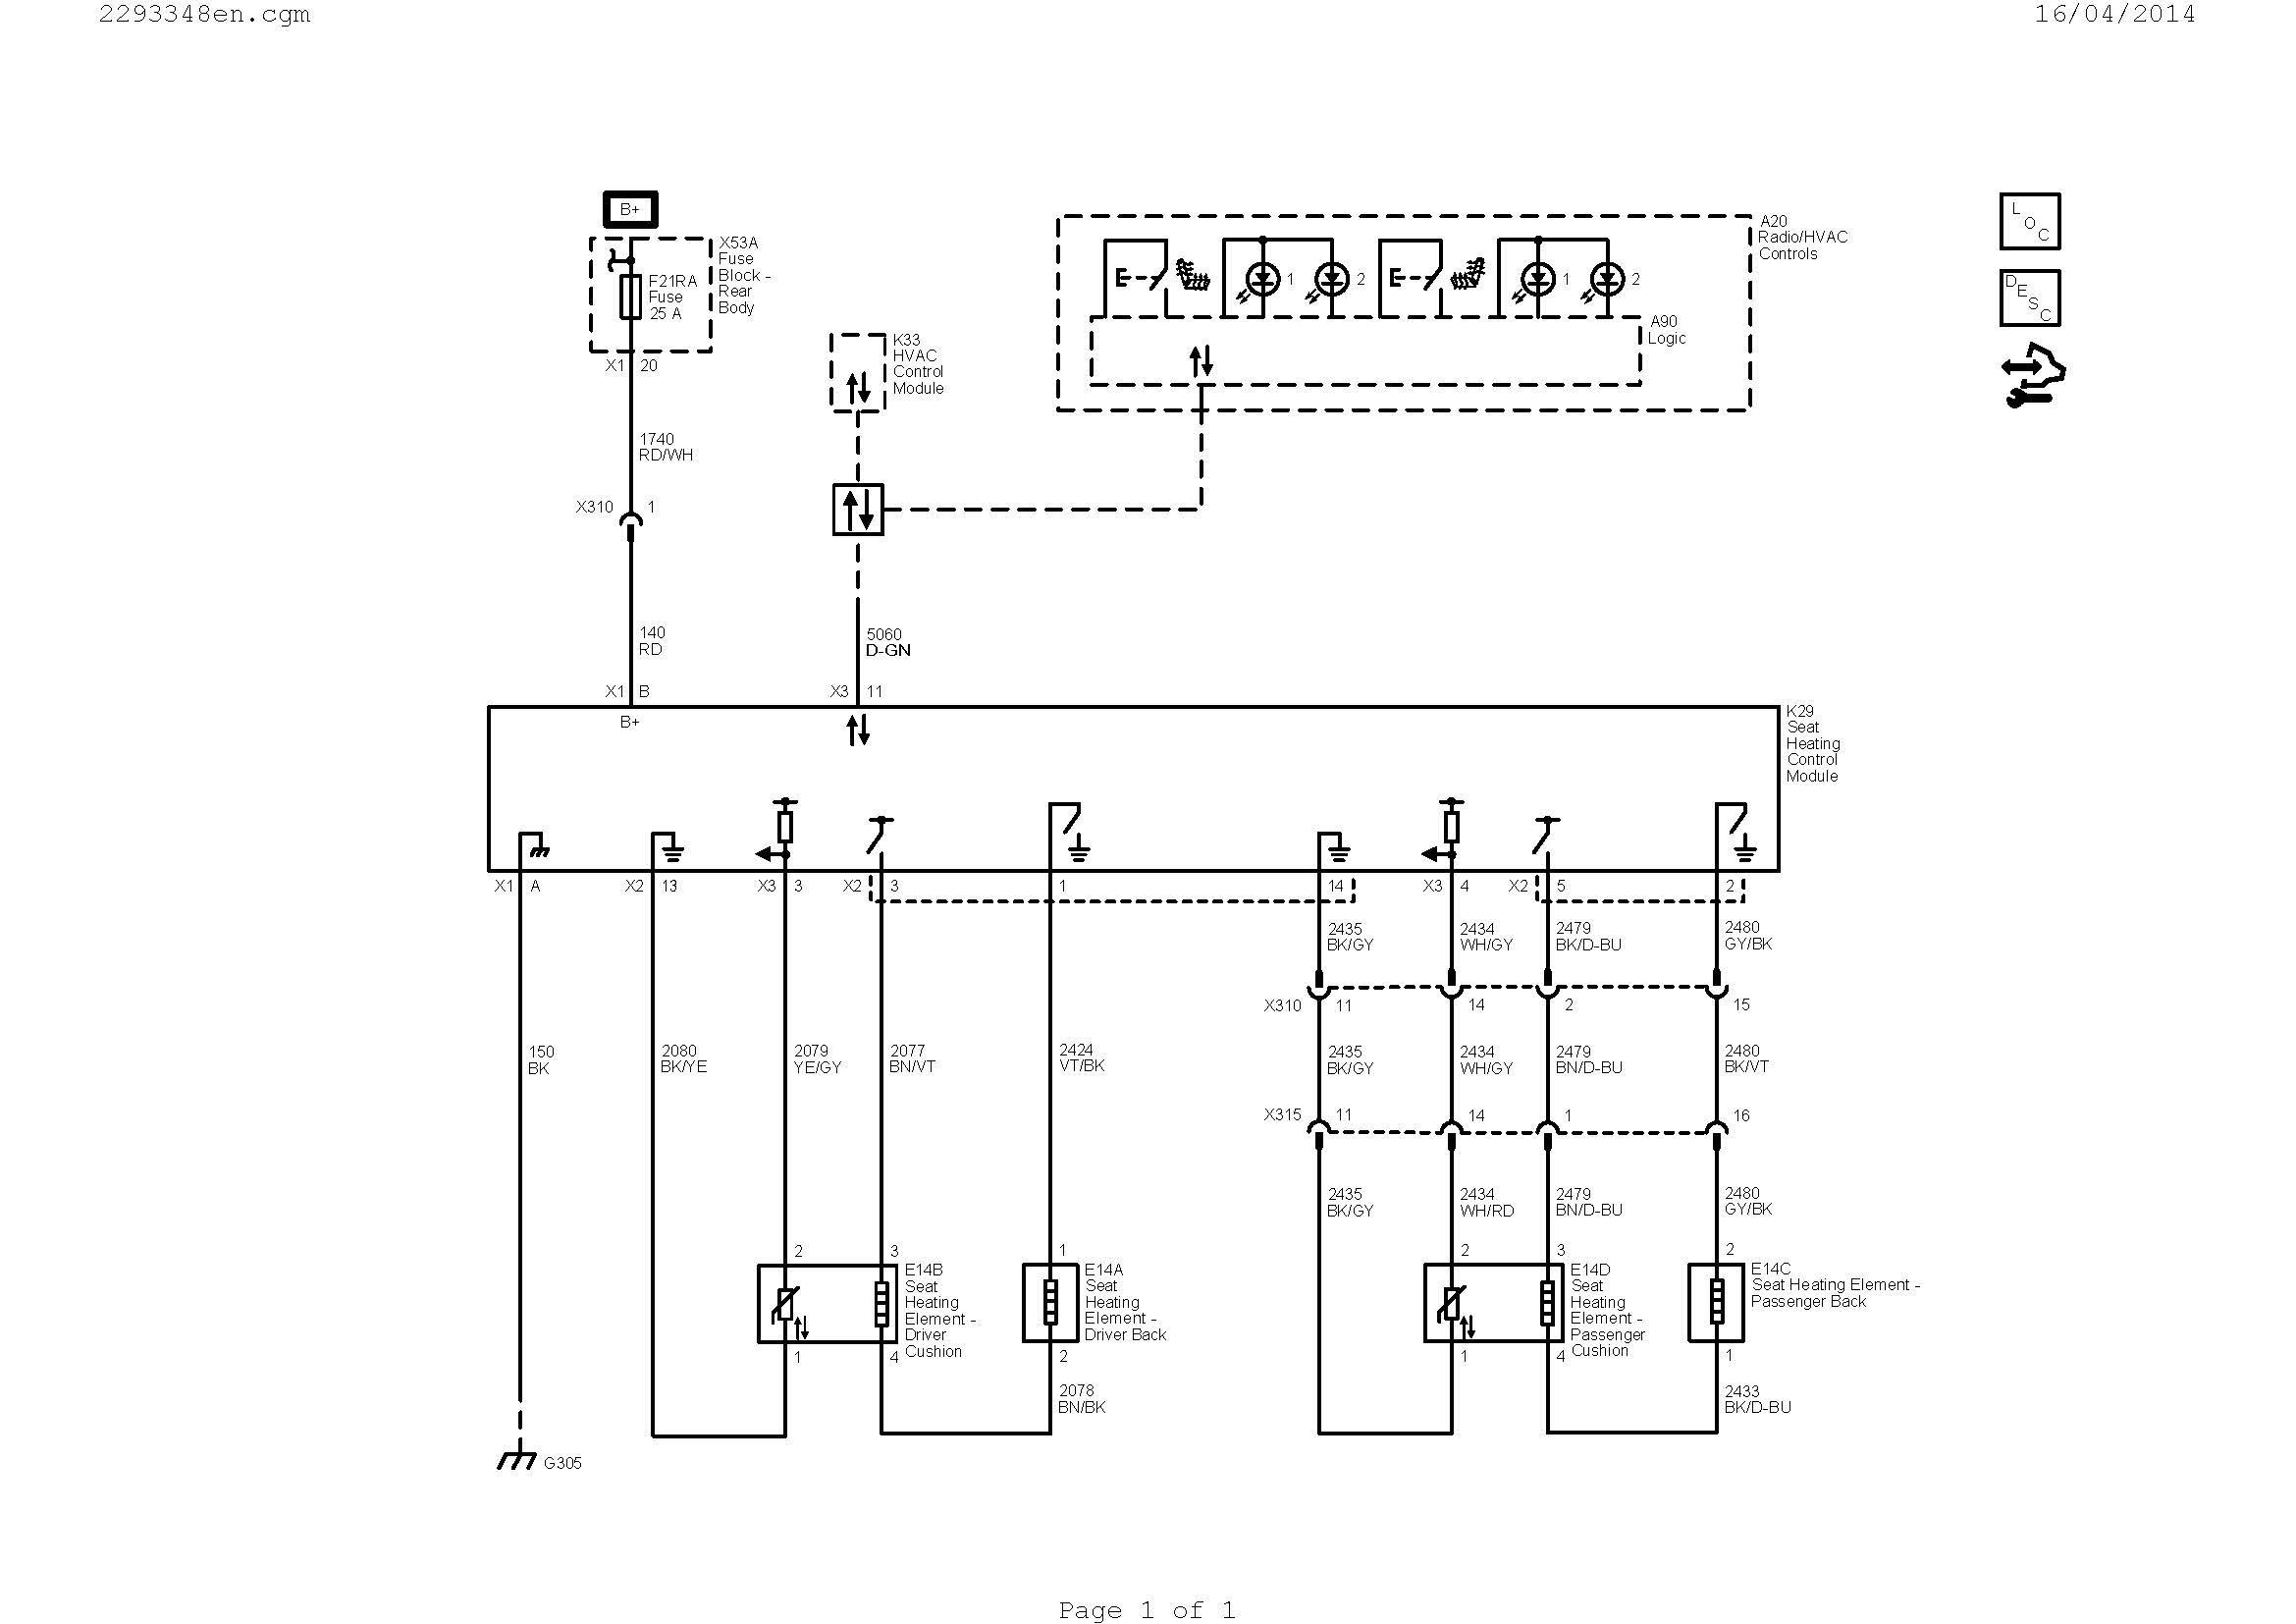 Dometic thermostat Wiring Diagram Dometic Ac Wiring Diagram Detailed Schematics Diagram Of Dometic thermostat Wiring Diagram